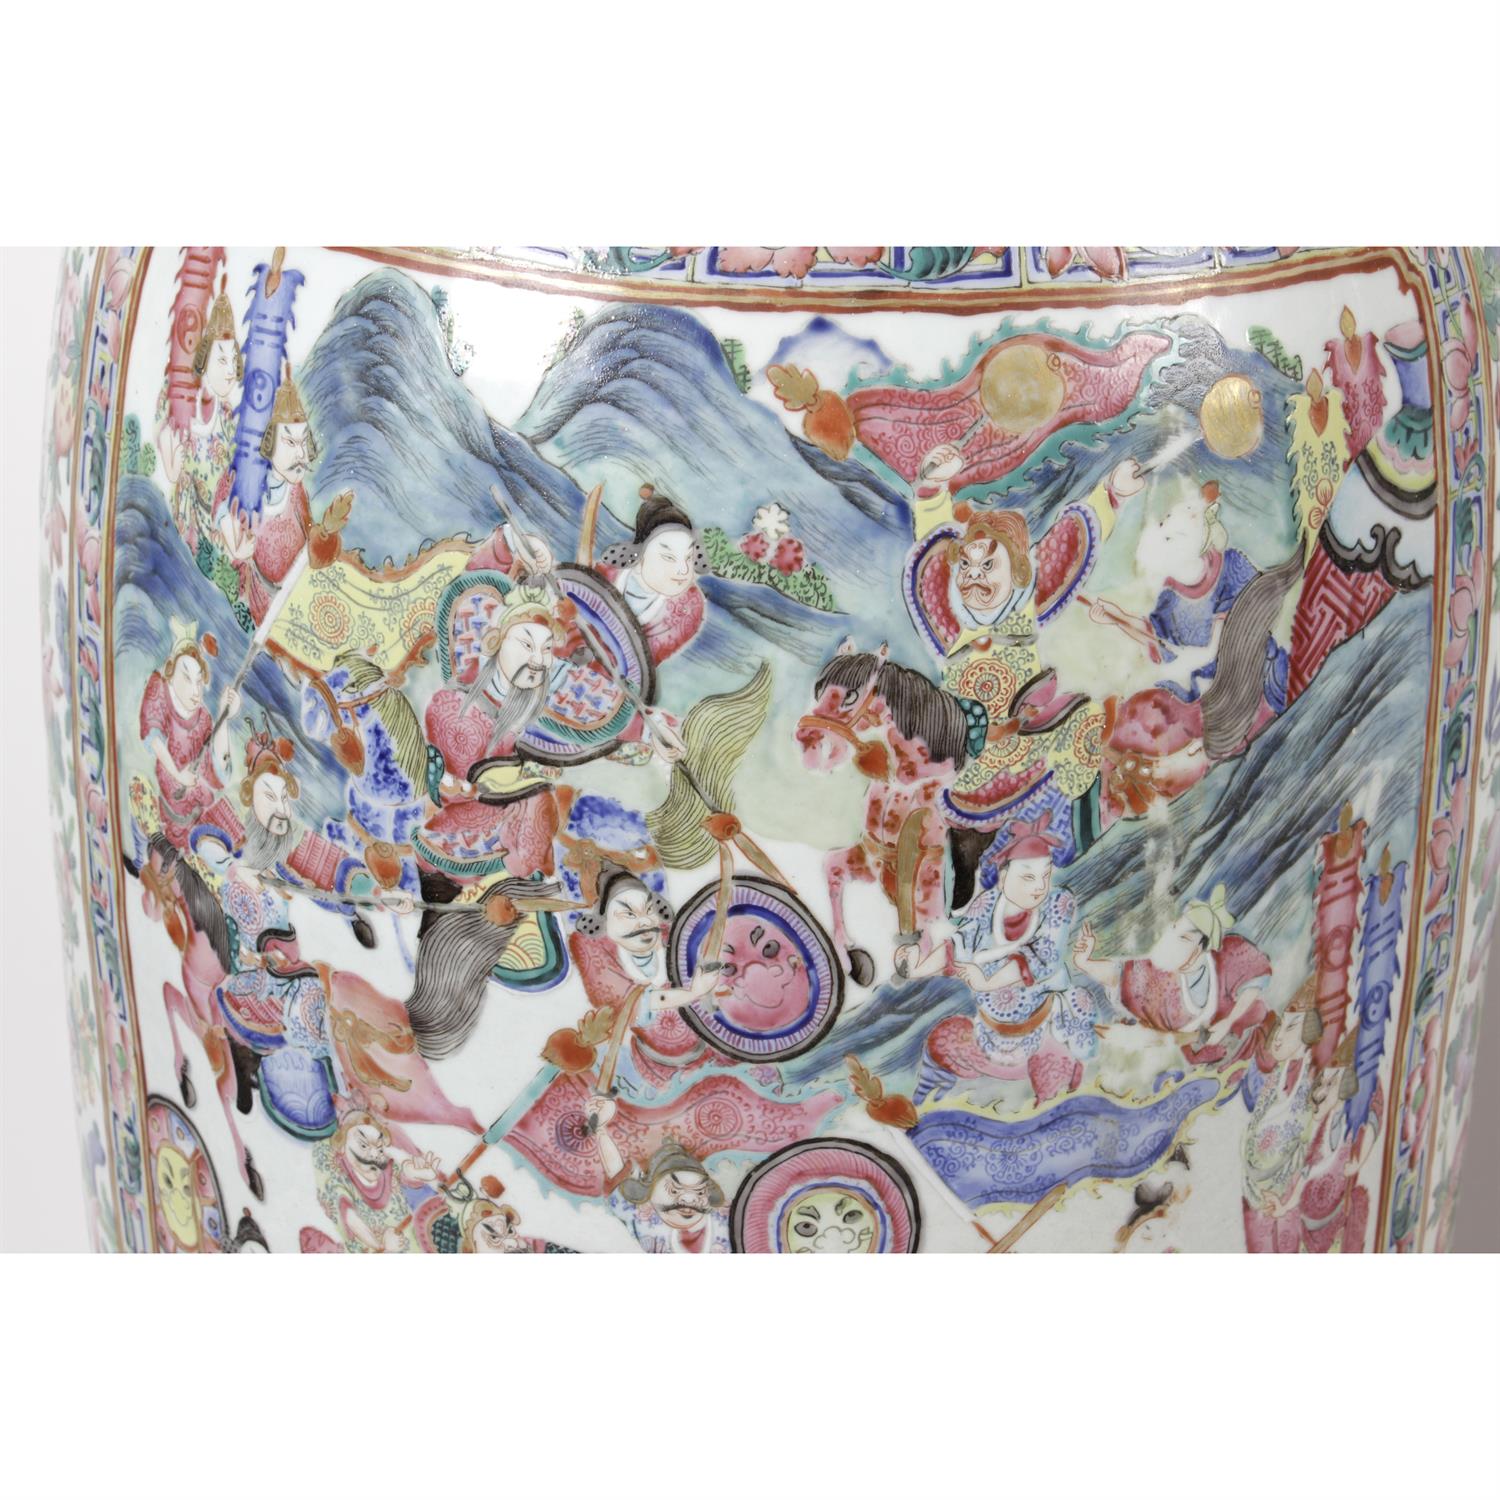 A pair of impressive, large mid-19th century Cantonese porcelain vases. - Image 6 of 20